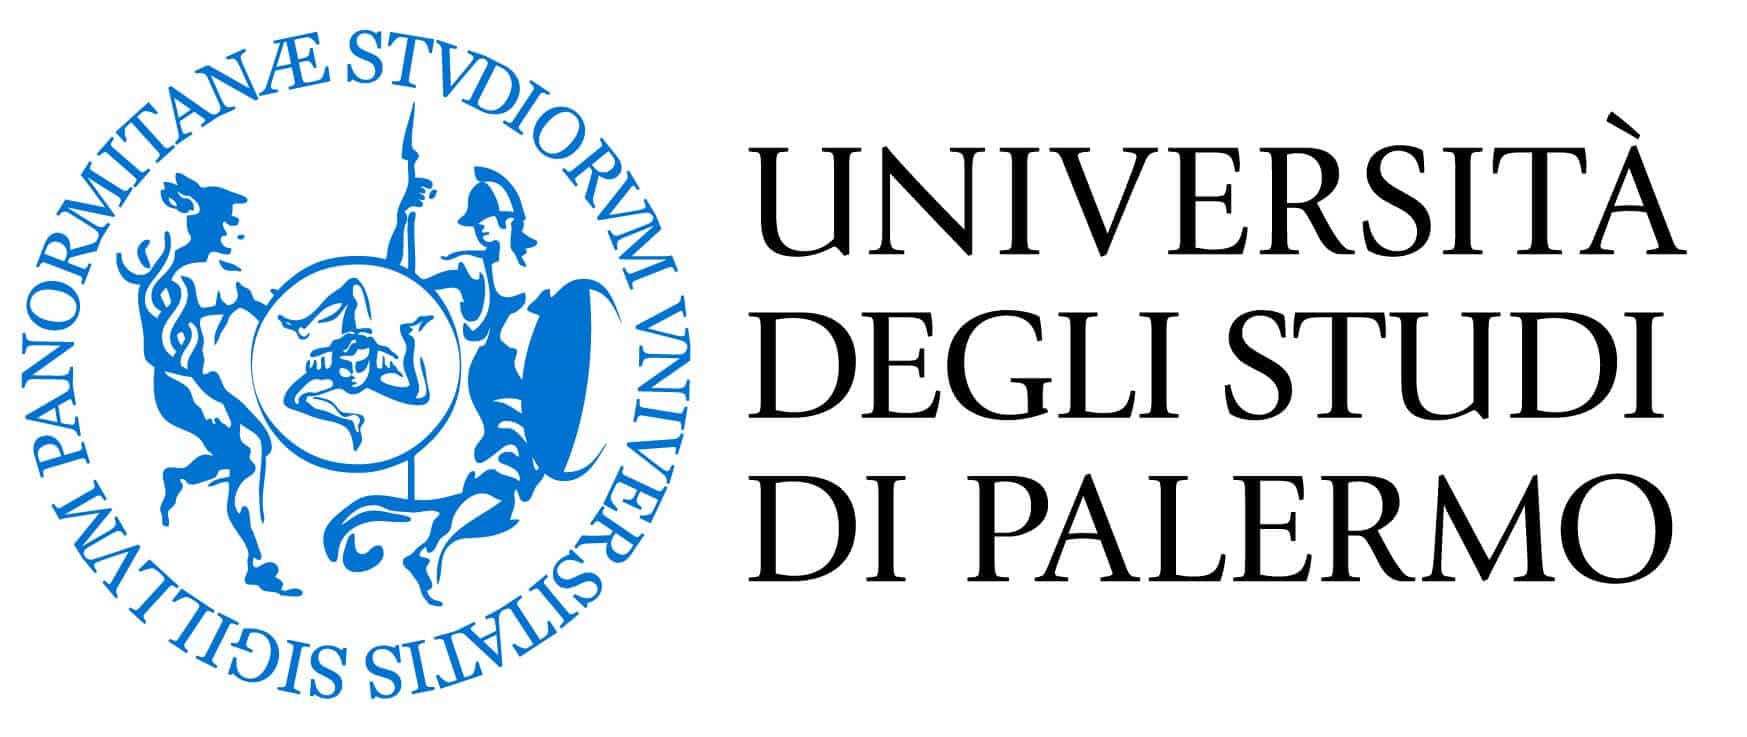 The course at the University of Palermo